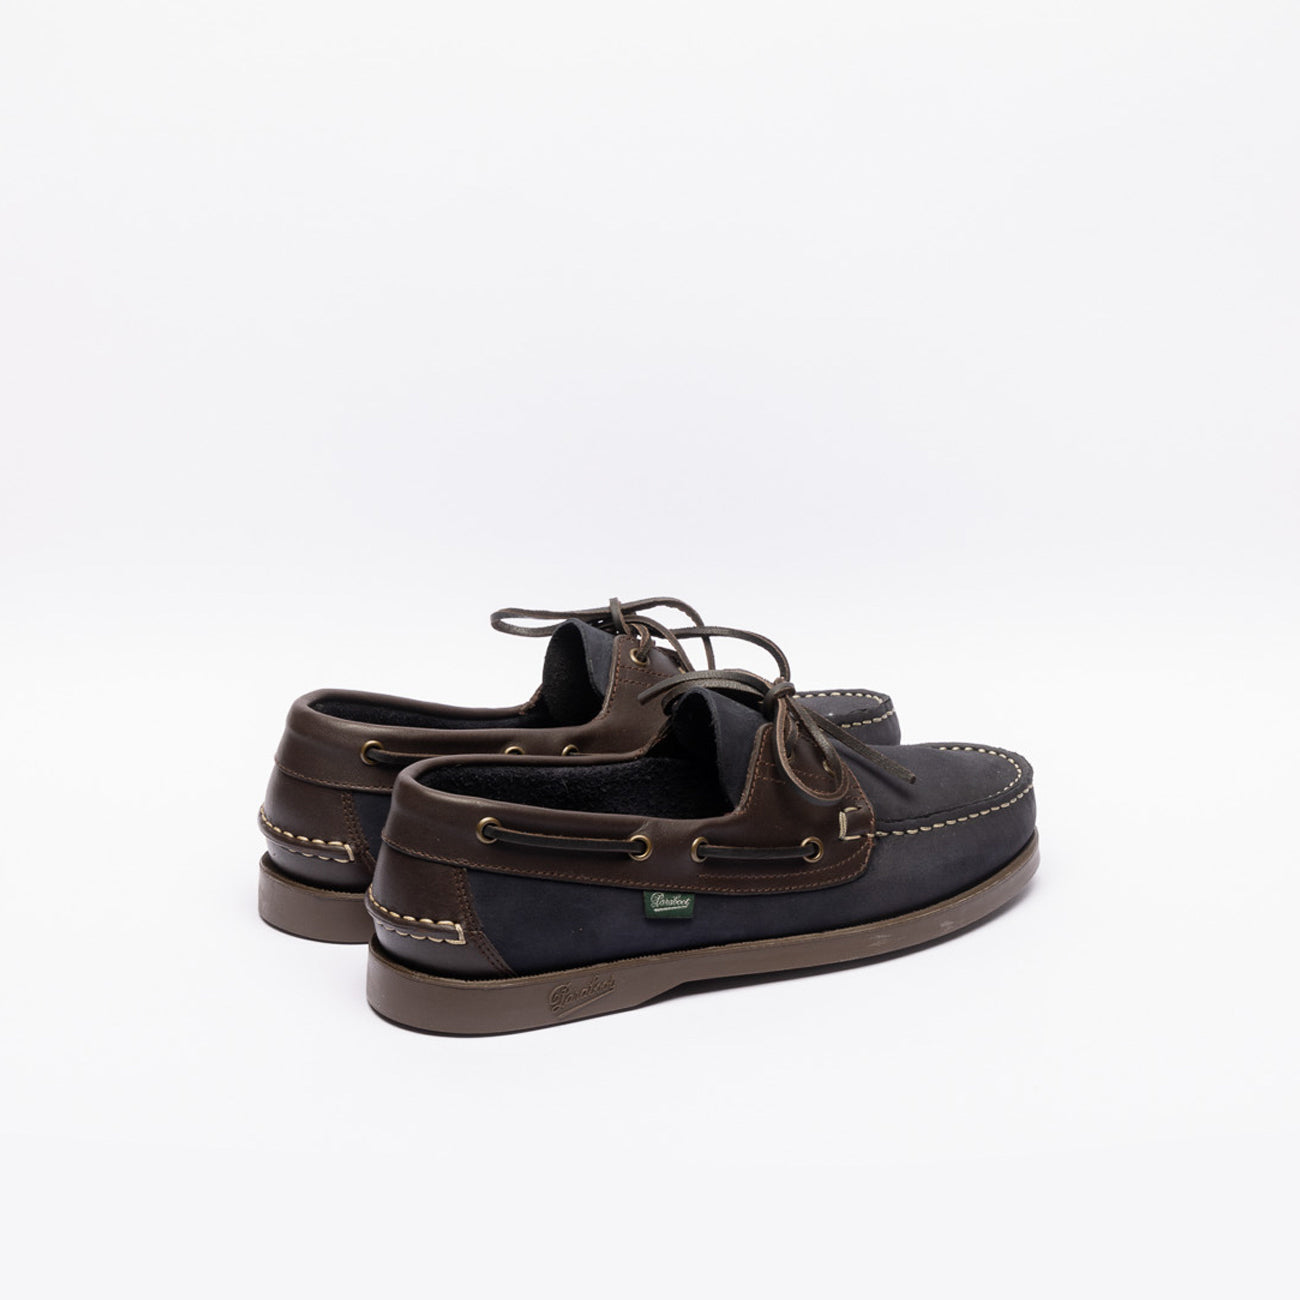 Paraboot Barth boat shoe in blue suede and brown leather